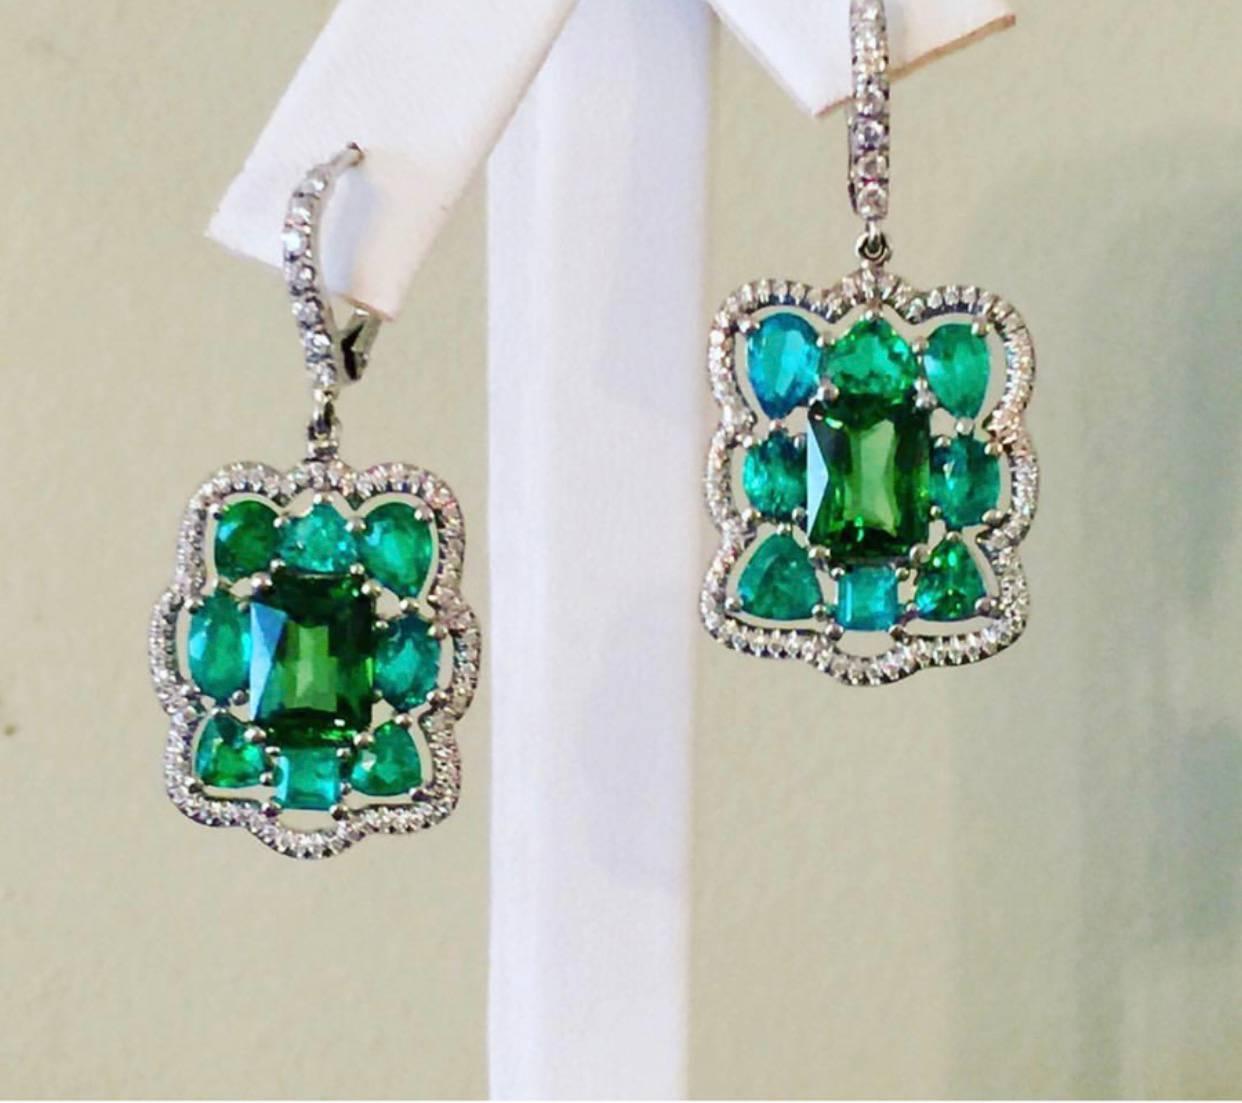 The Platinum Earrings are one of a kind modern heirlooms. GIA certified Tsavorites are the perfectly matched Highest Quality  Radiant Cut Stones, they are Surrounded by Brazilian Paraiba  Tourmaline's, each of these Paraibas are shimmering with Neon